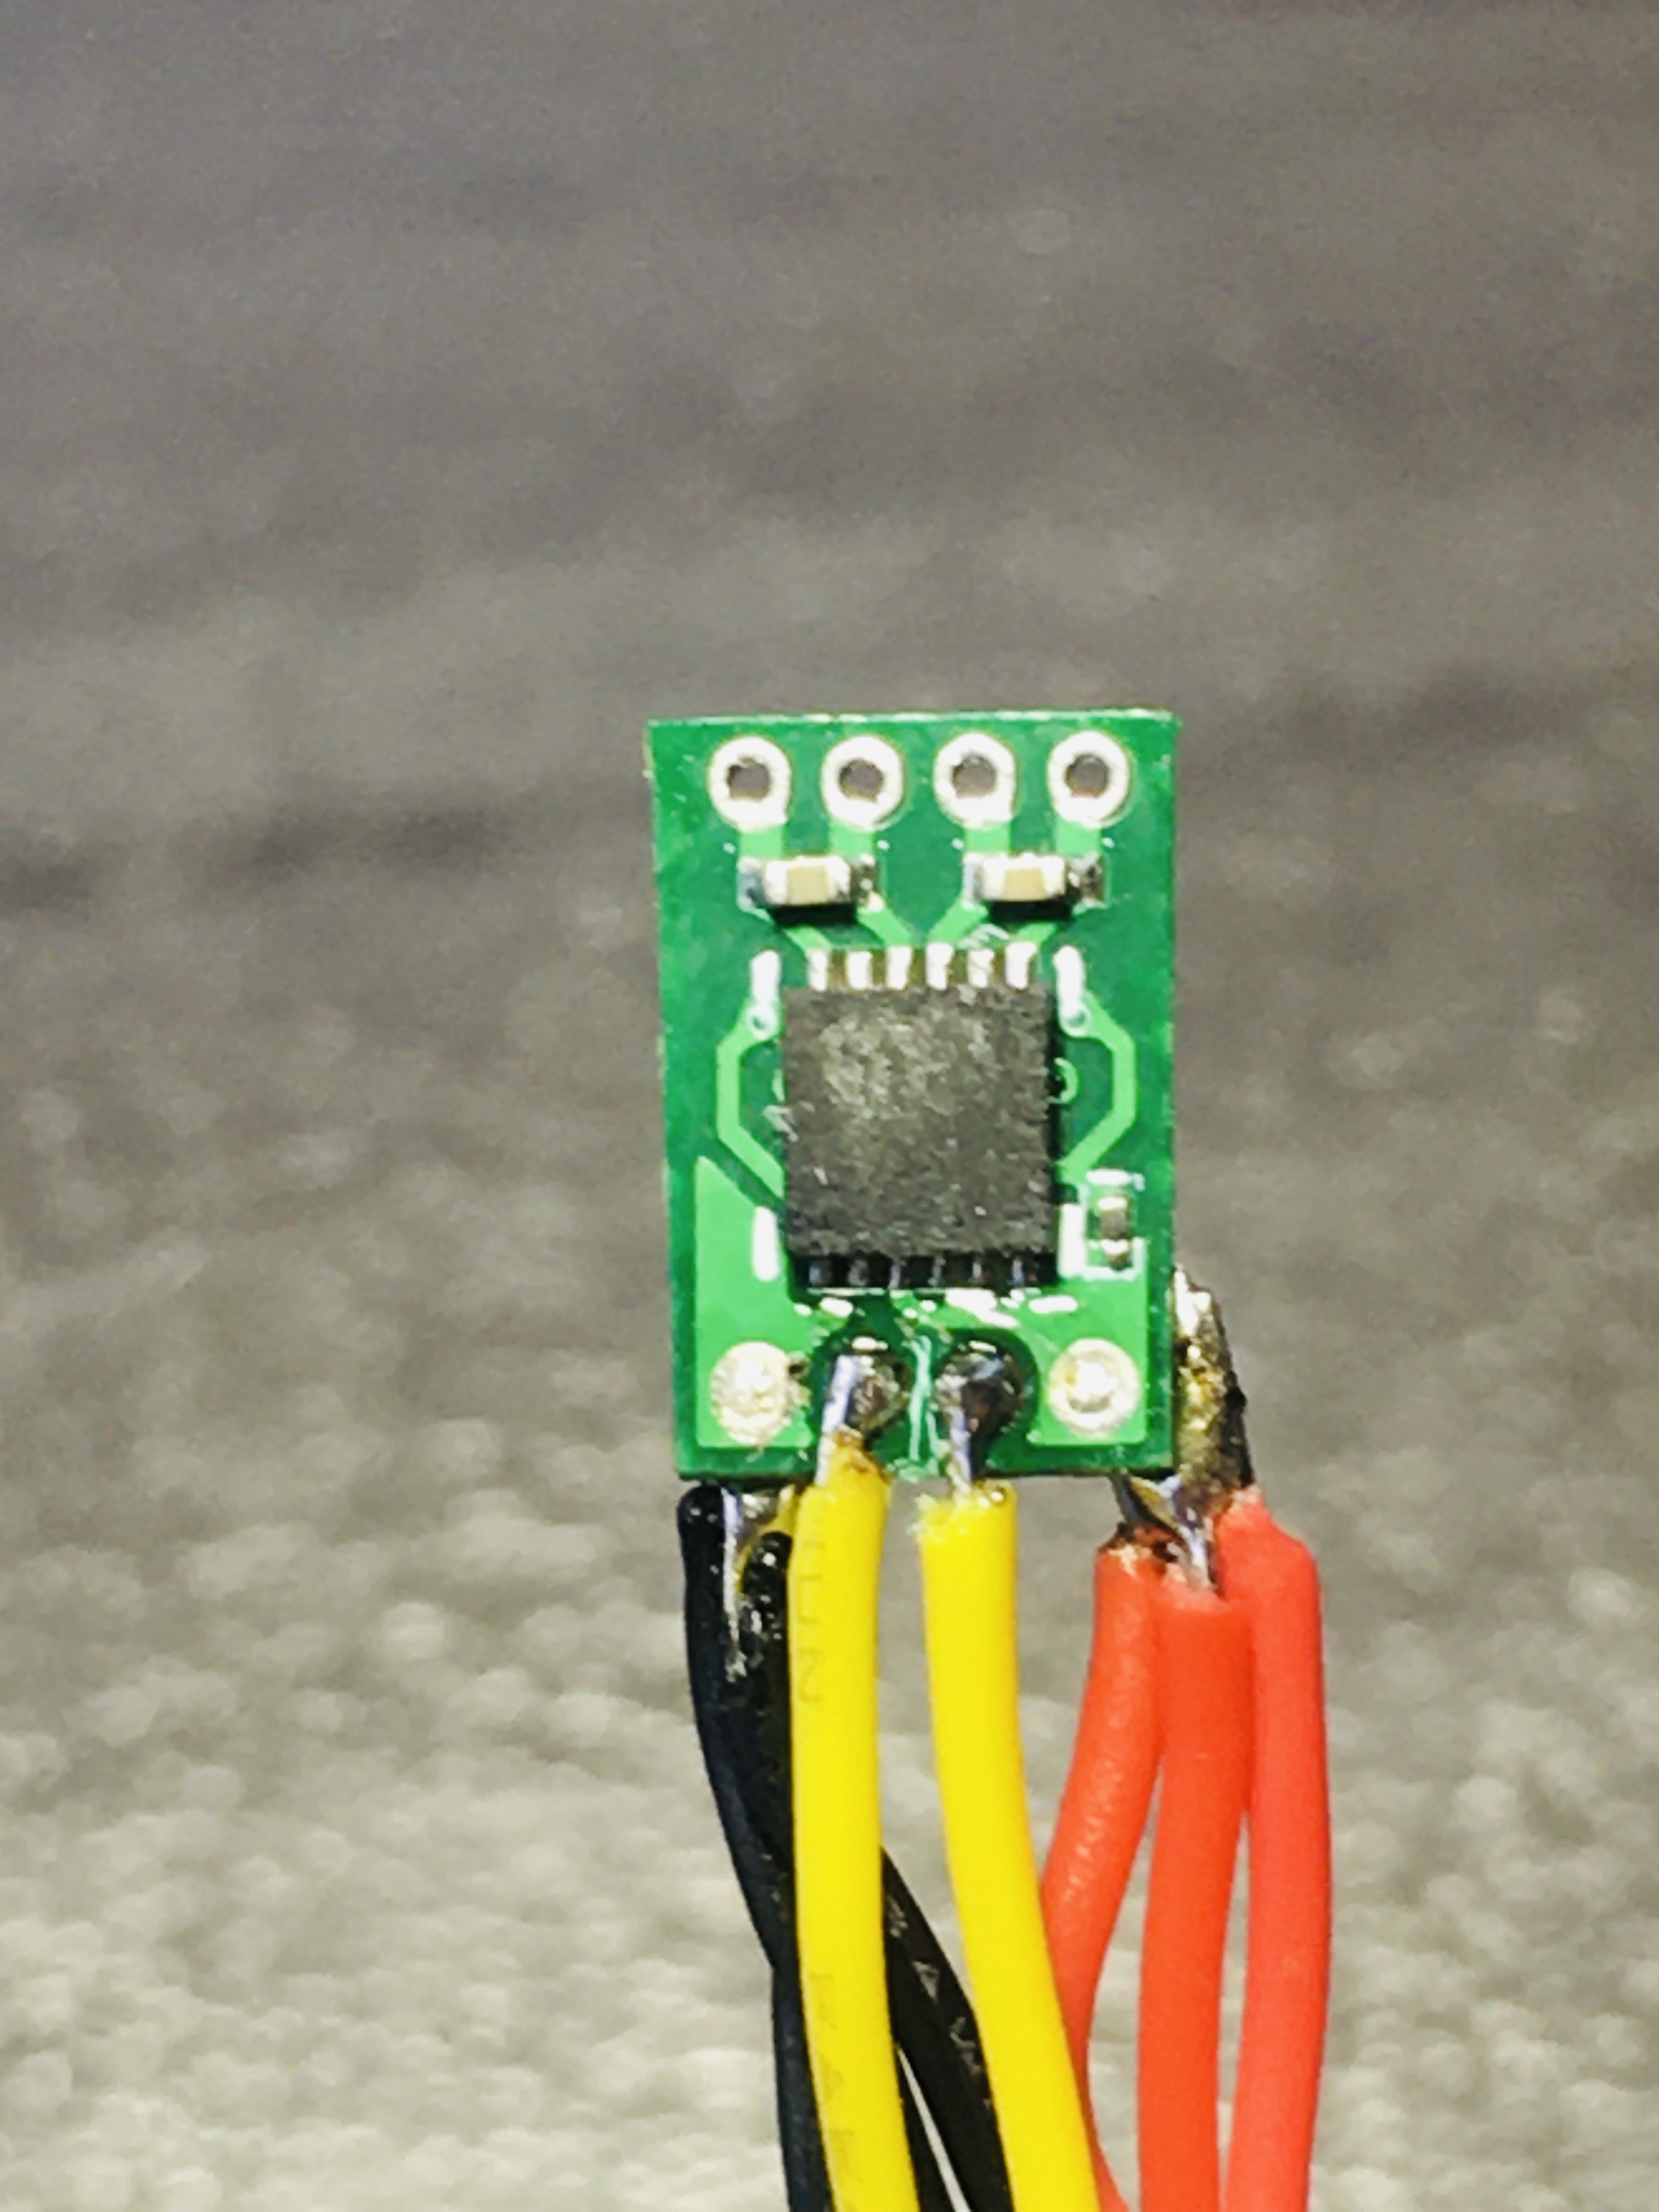 The yellow PPM signal wires are soldered on the back side of the ESC after the center pads are tinned.